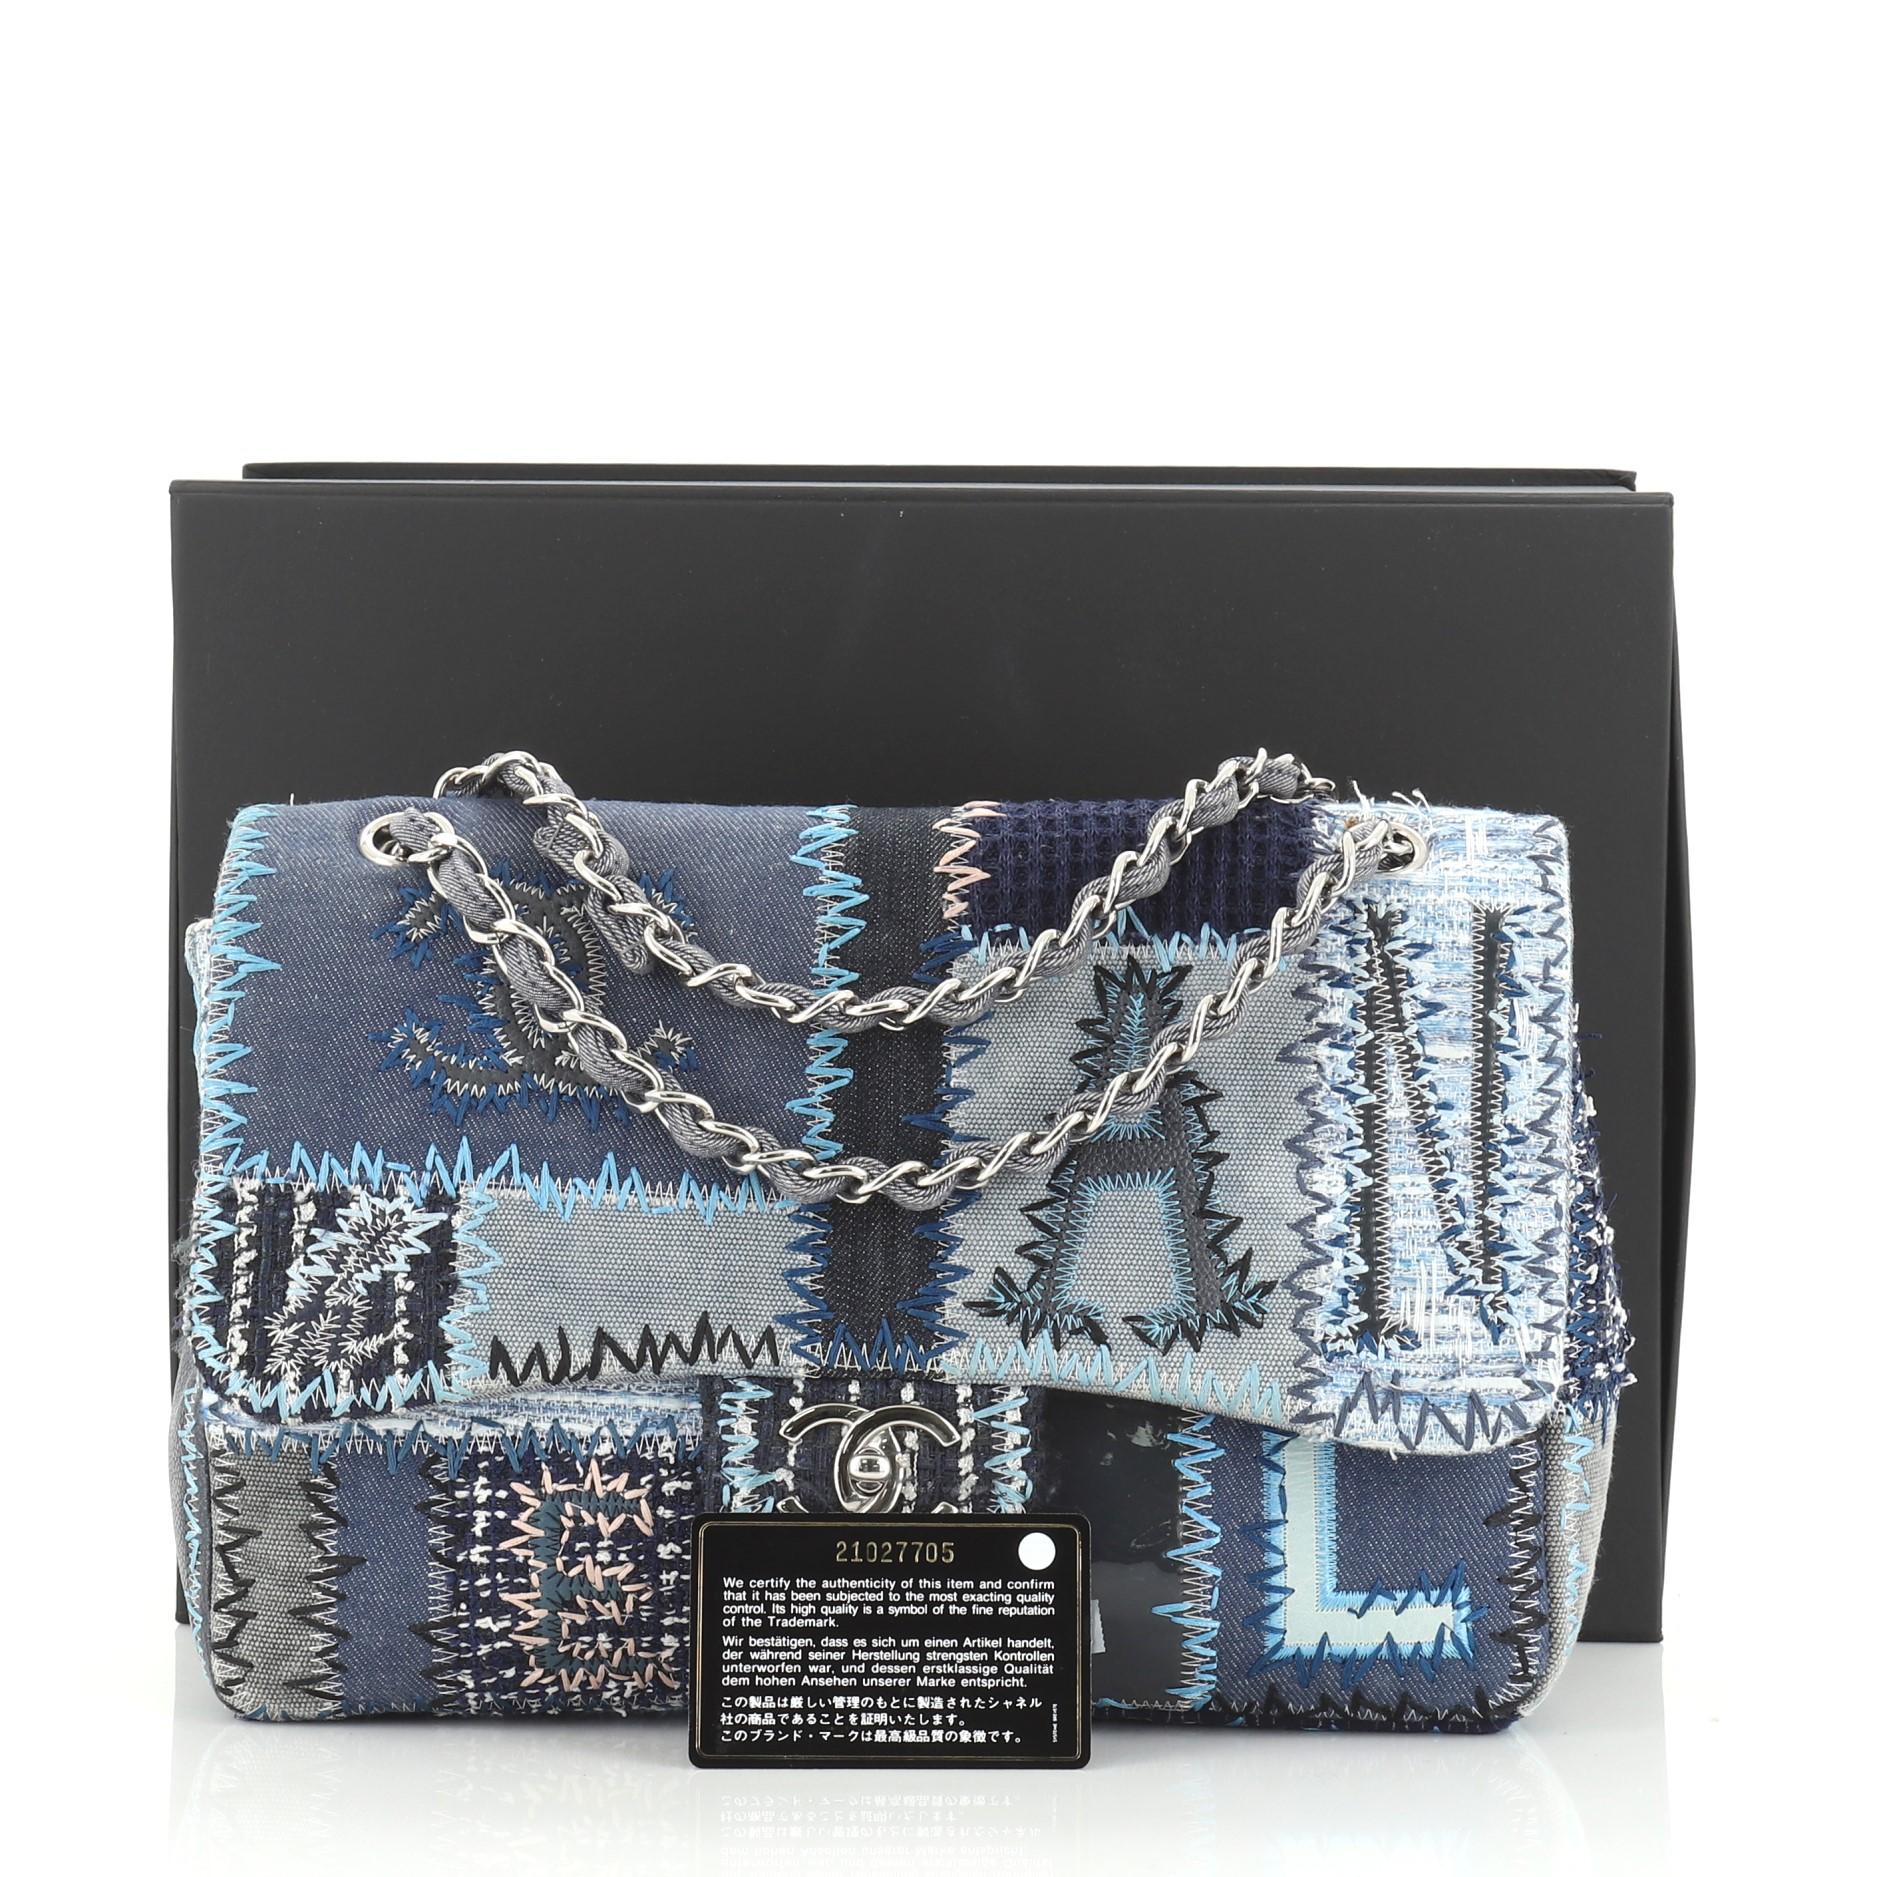 This Chanel Flap Bag Multicolor Patchwork Jumbo, crafted in blue patchwork denim, features woven-in leather chain straps, contrast stitching, and silver-tone hardware. Its CC turn-lock closure opens to a blue fabric interior with zip and slip